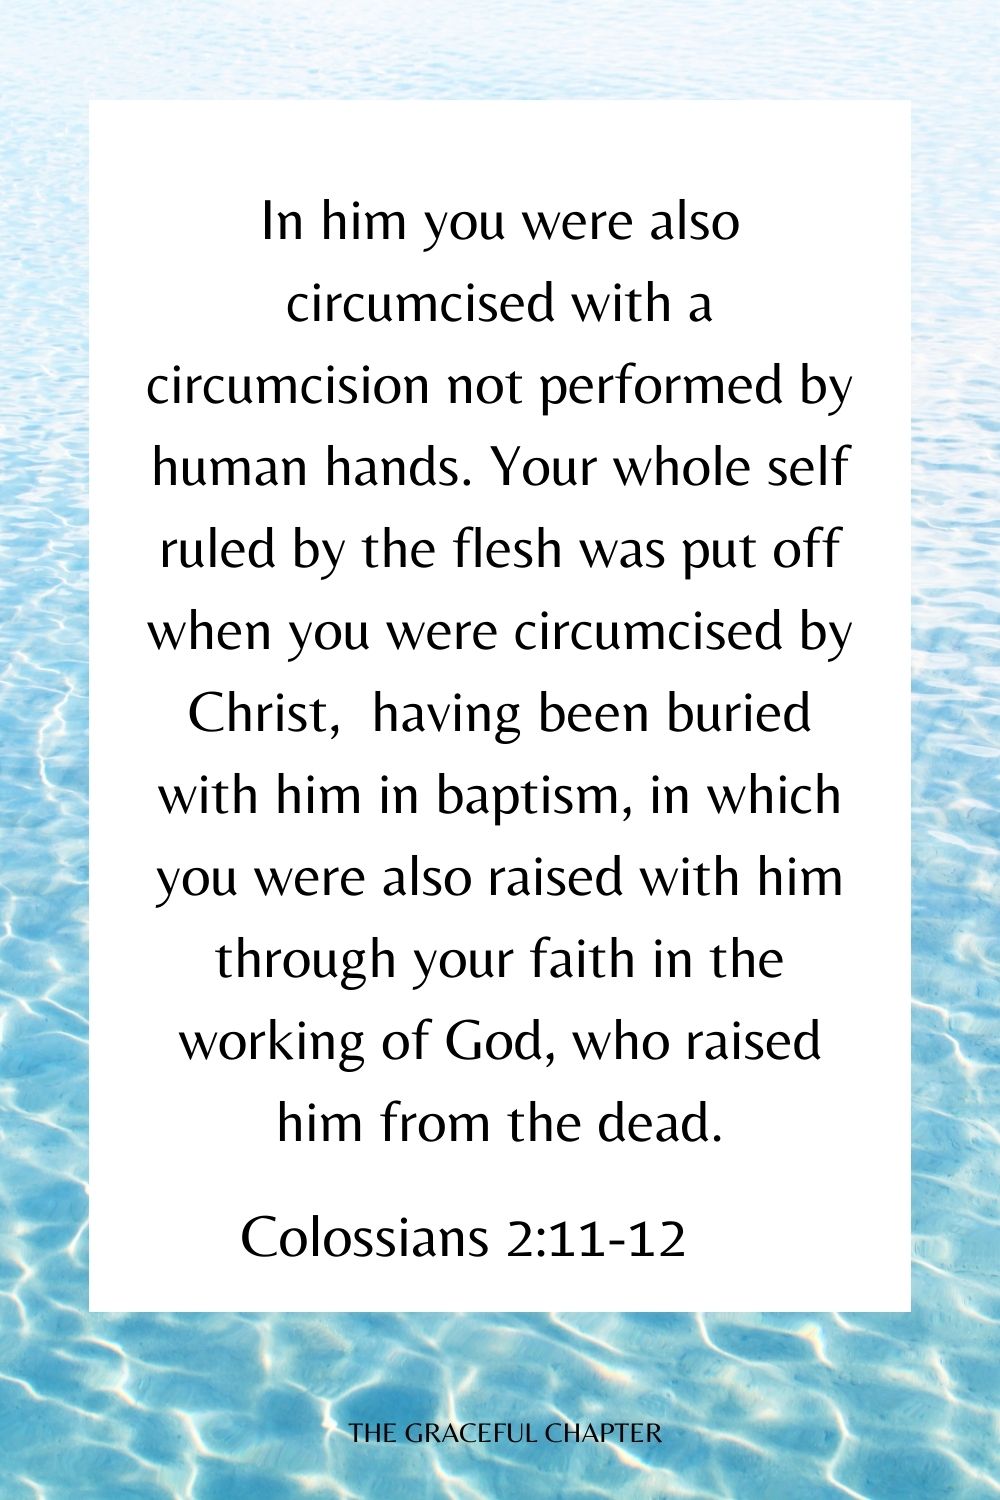 In him you were also circumcised with a circumcision not performed by human hands. Your whole self ruled by the flesh was put off when you were circumcised by Christ,  having been buried with him in baptism, in which you were also raised with him through your faith in the working of God, who raised him from the dead. Colossians 2:11-12